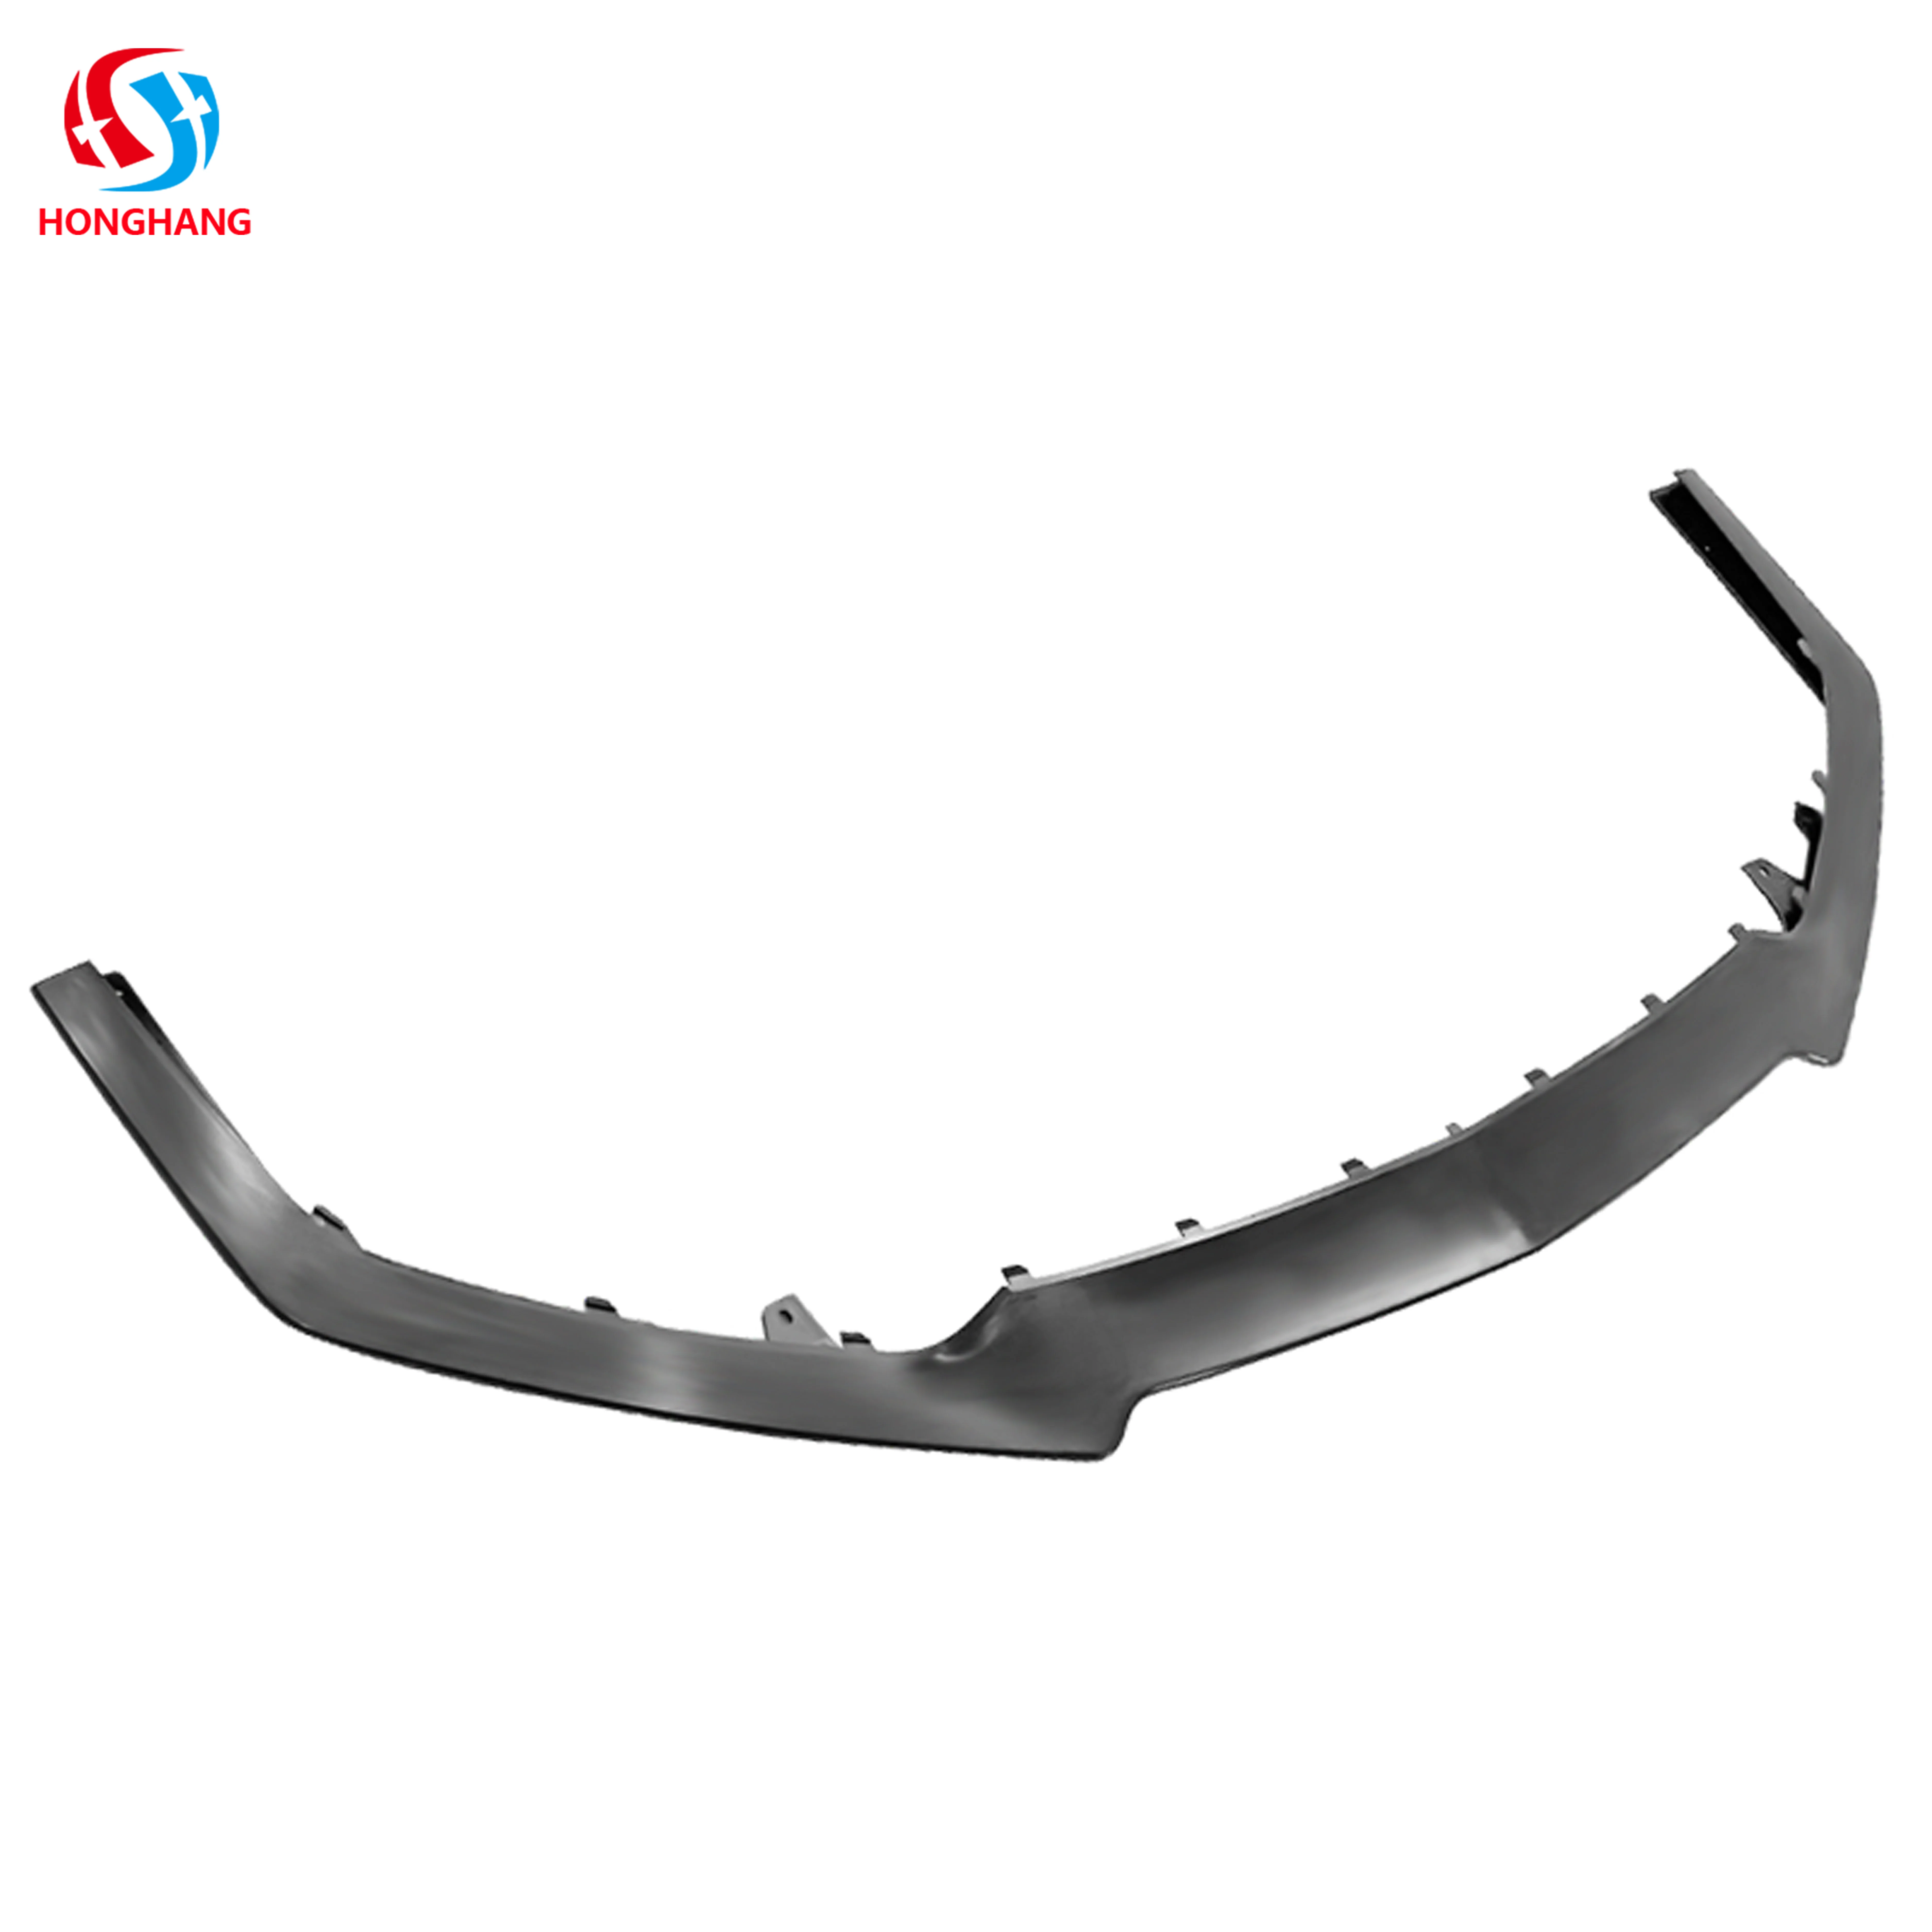 Honghang brand factory produces car front bumper, auto parts front bumper lip splitter for ford Mustang parts 2015-2021